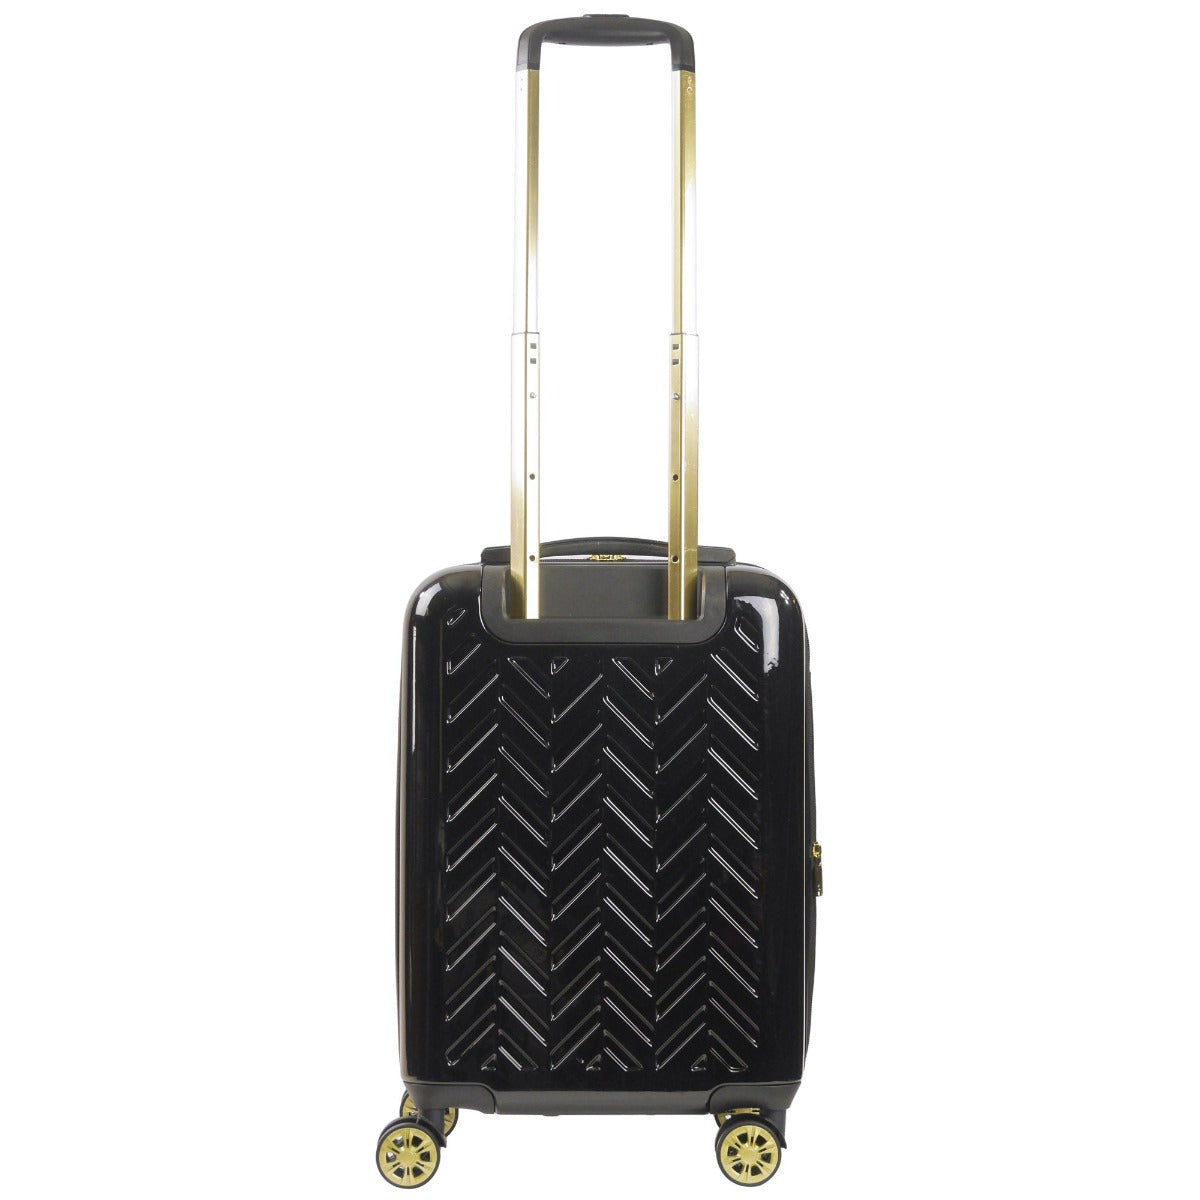 Ful Groove 22" carry-on hardside degree spinner suitcase Black luggage gold details